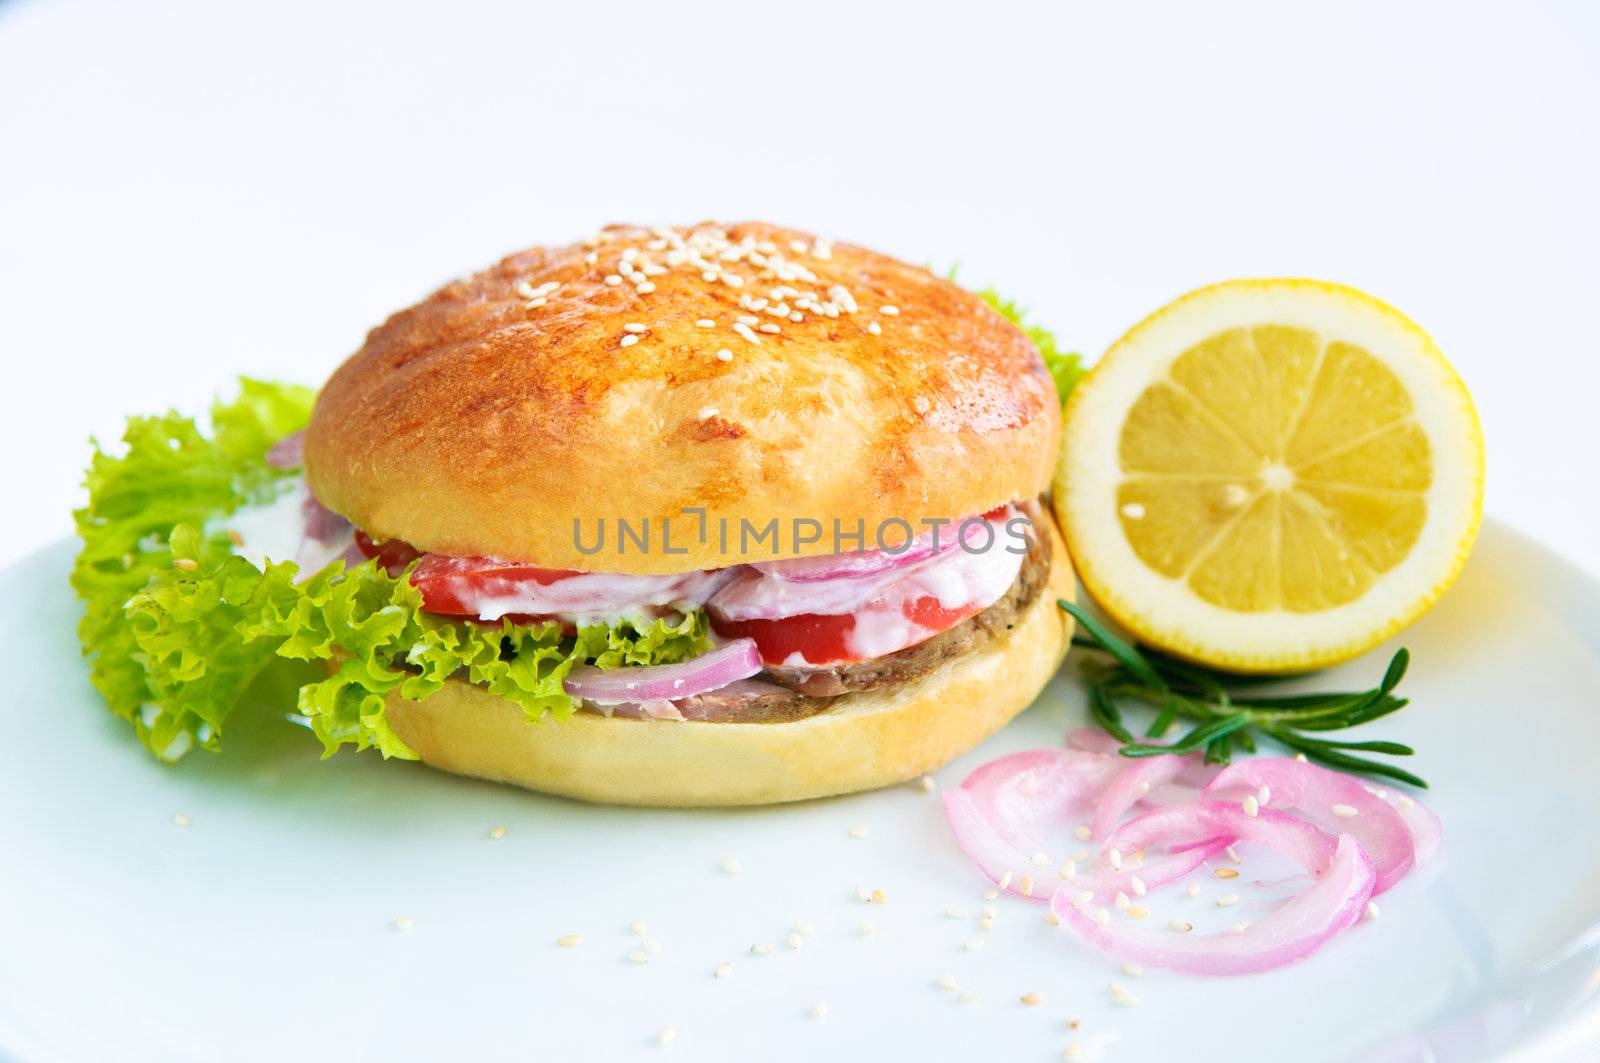 A big juicy burger ready to satiate your lunchtime appetite